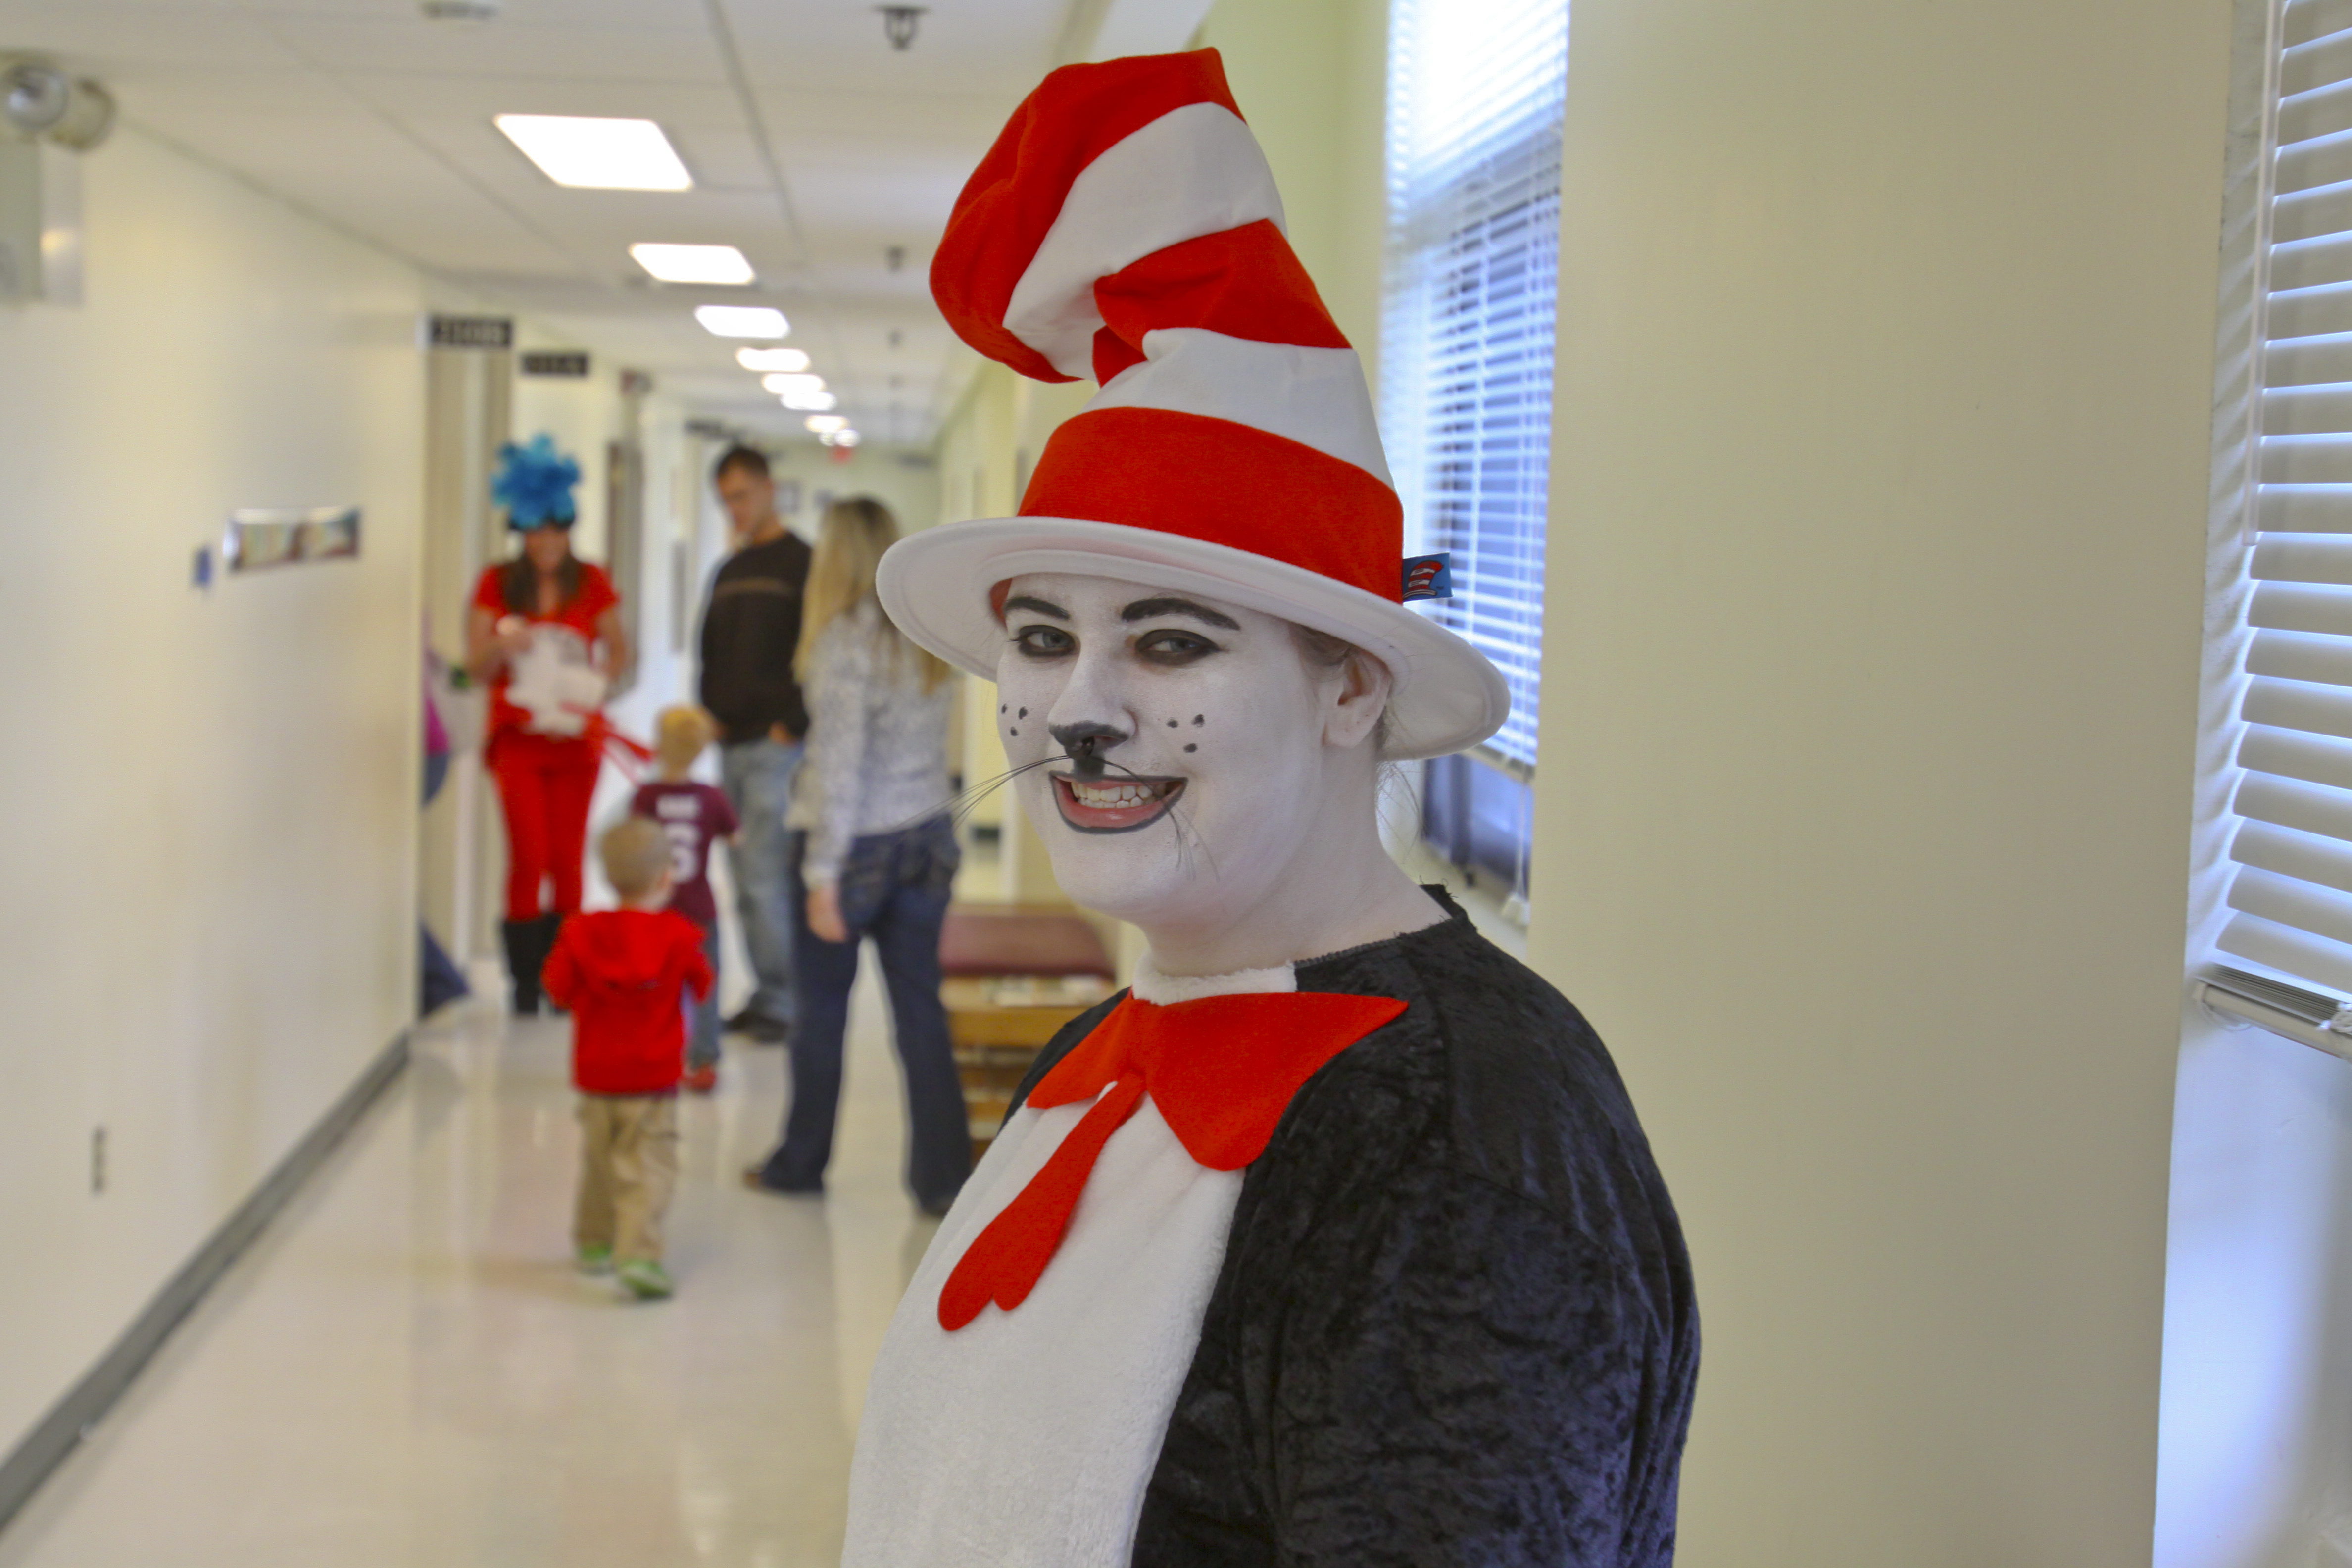 Read Across America with the Cat in the Hat 130301-M-MX805-135.jpg.